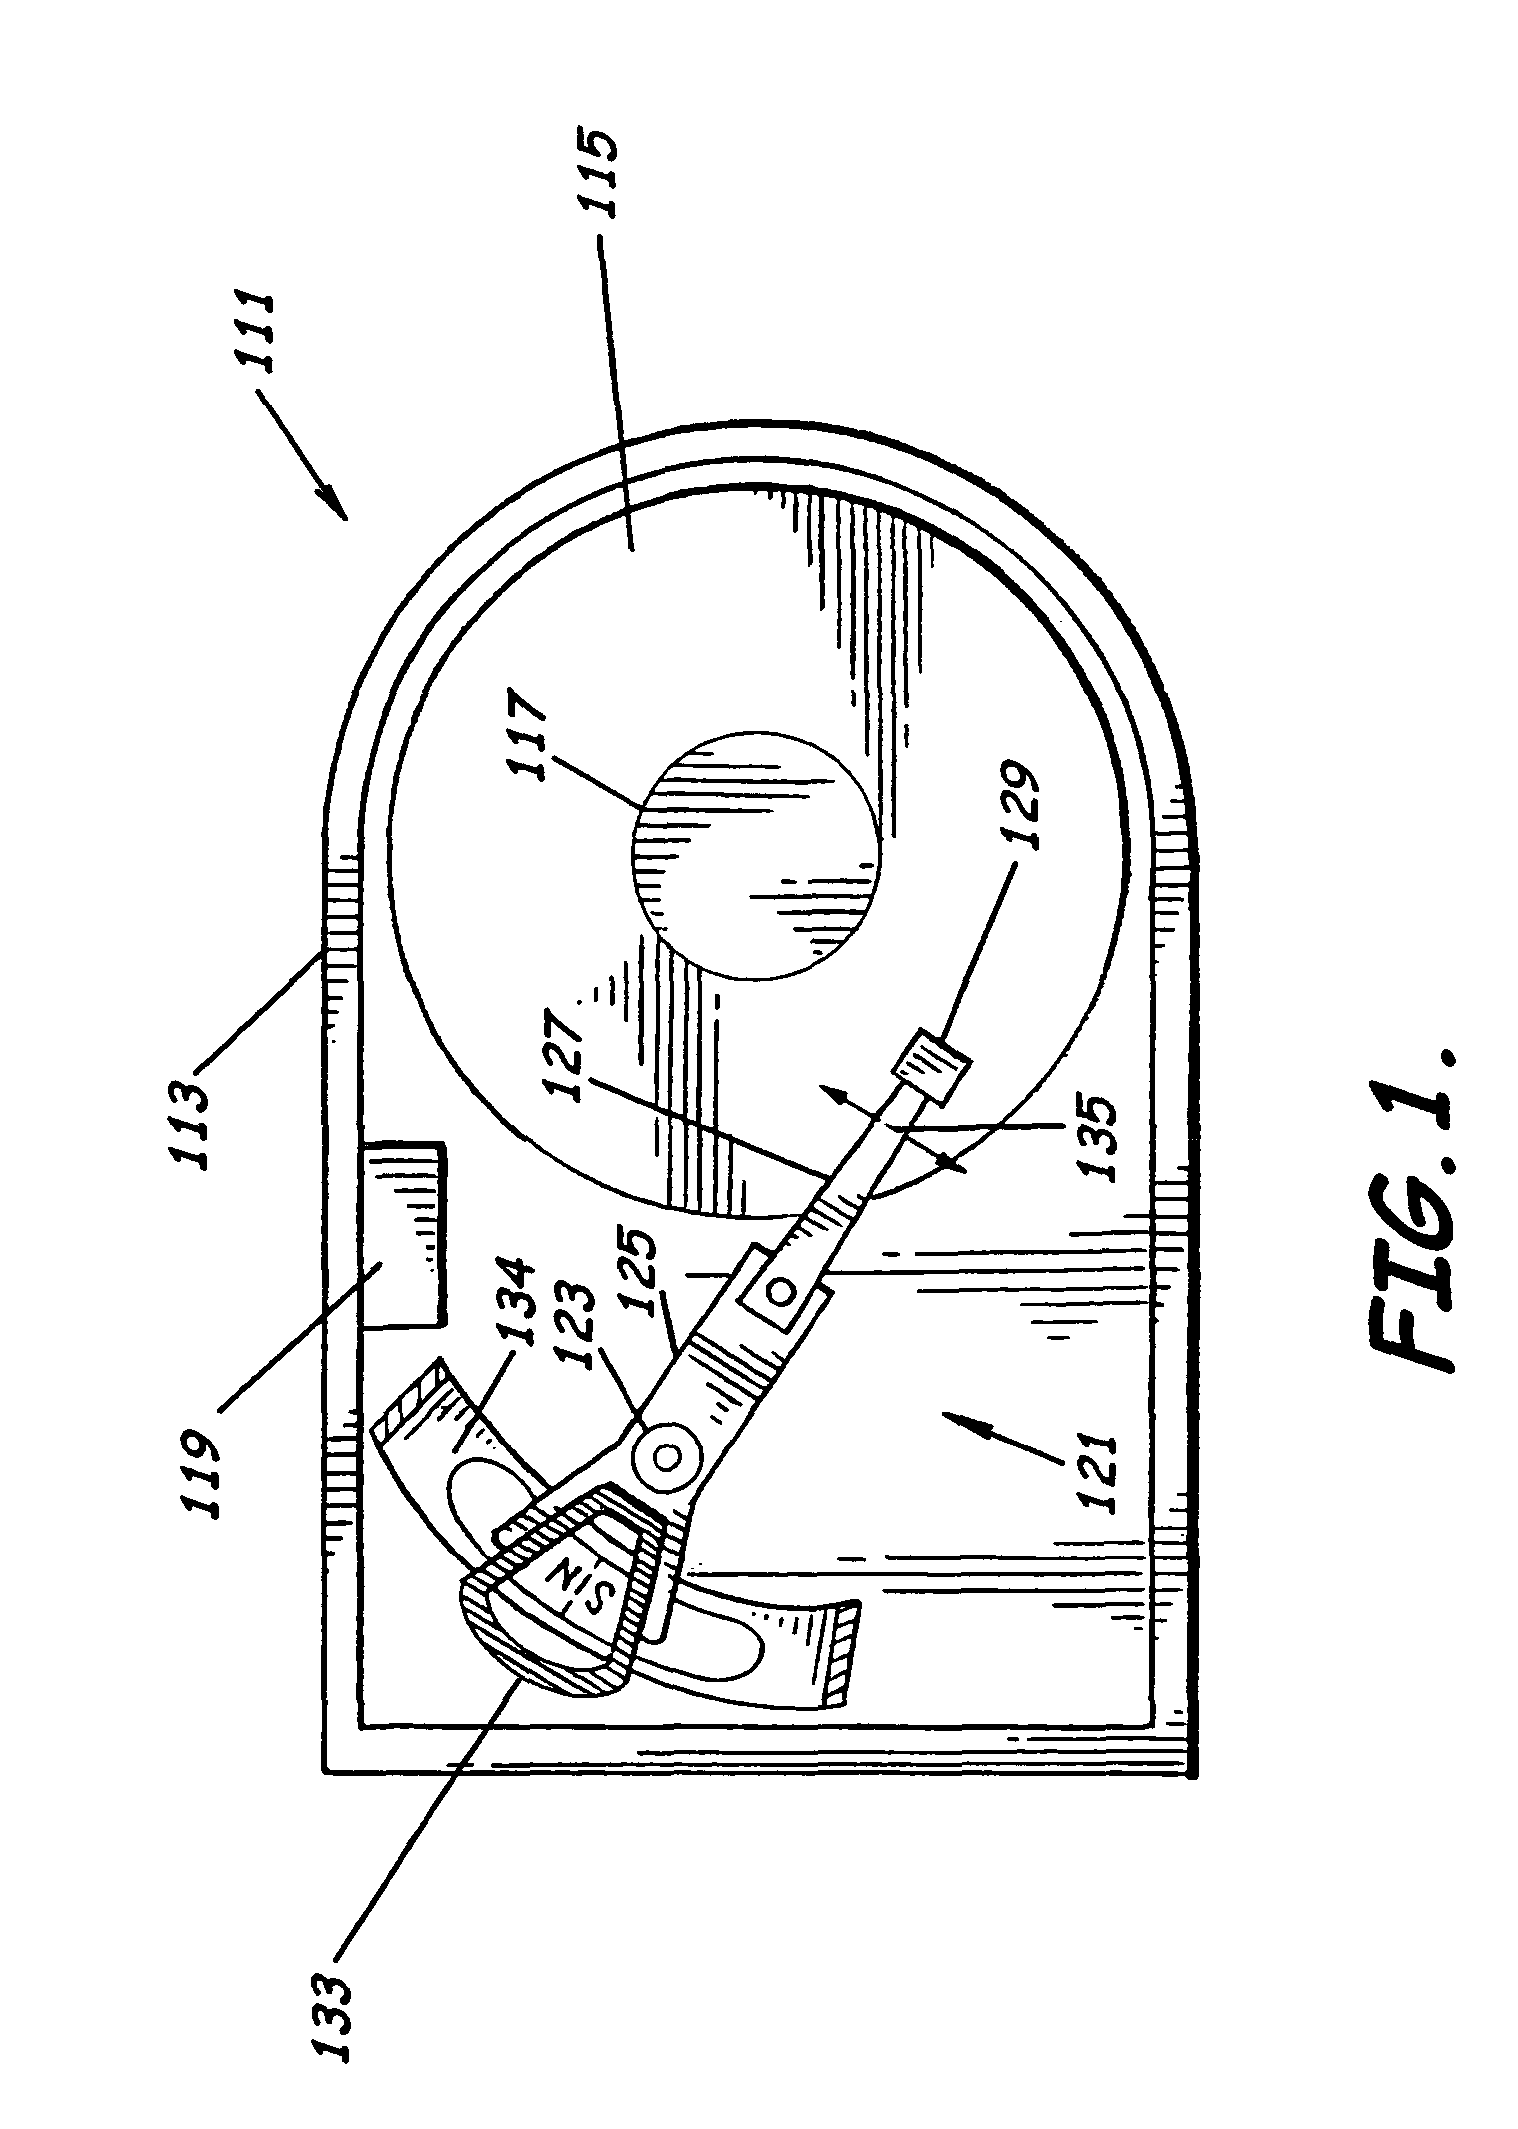 Disk drive with controlled pitch static attitude of sliders on integrated lead suspensions by improved plastic deformation processing